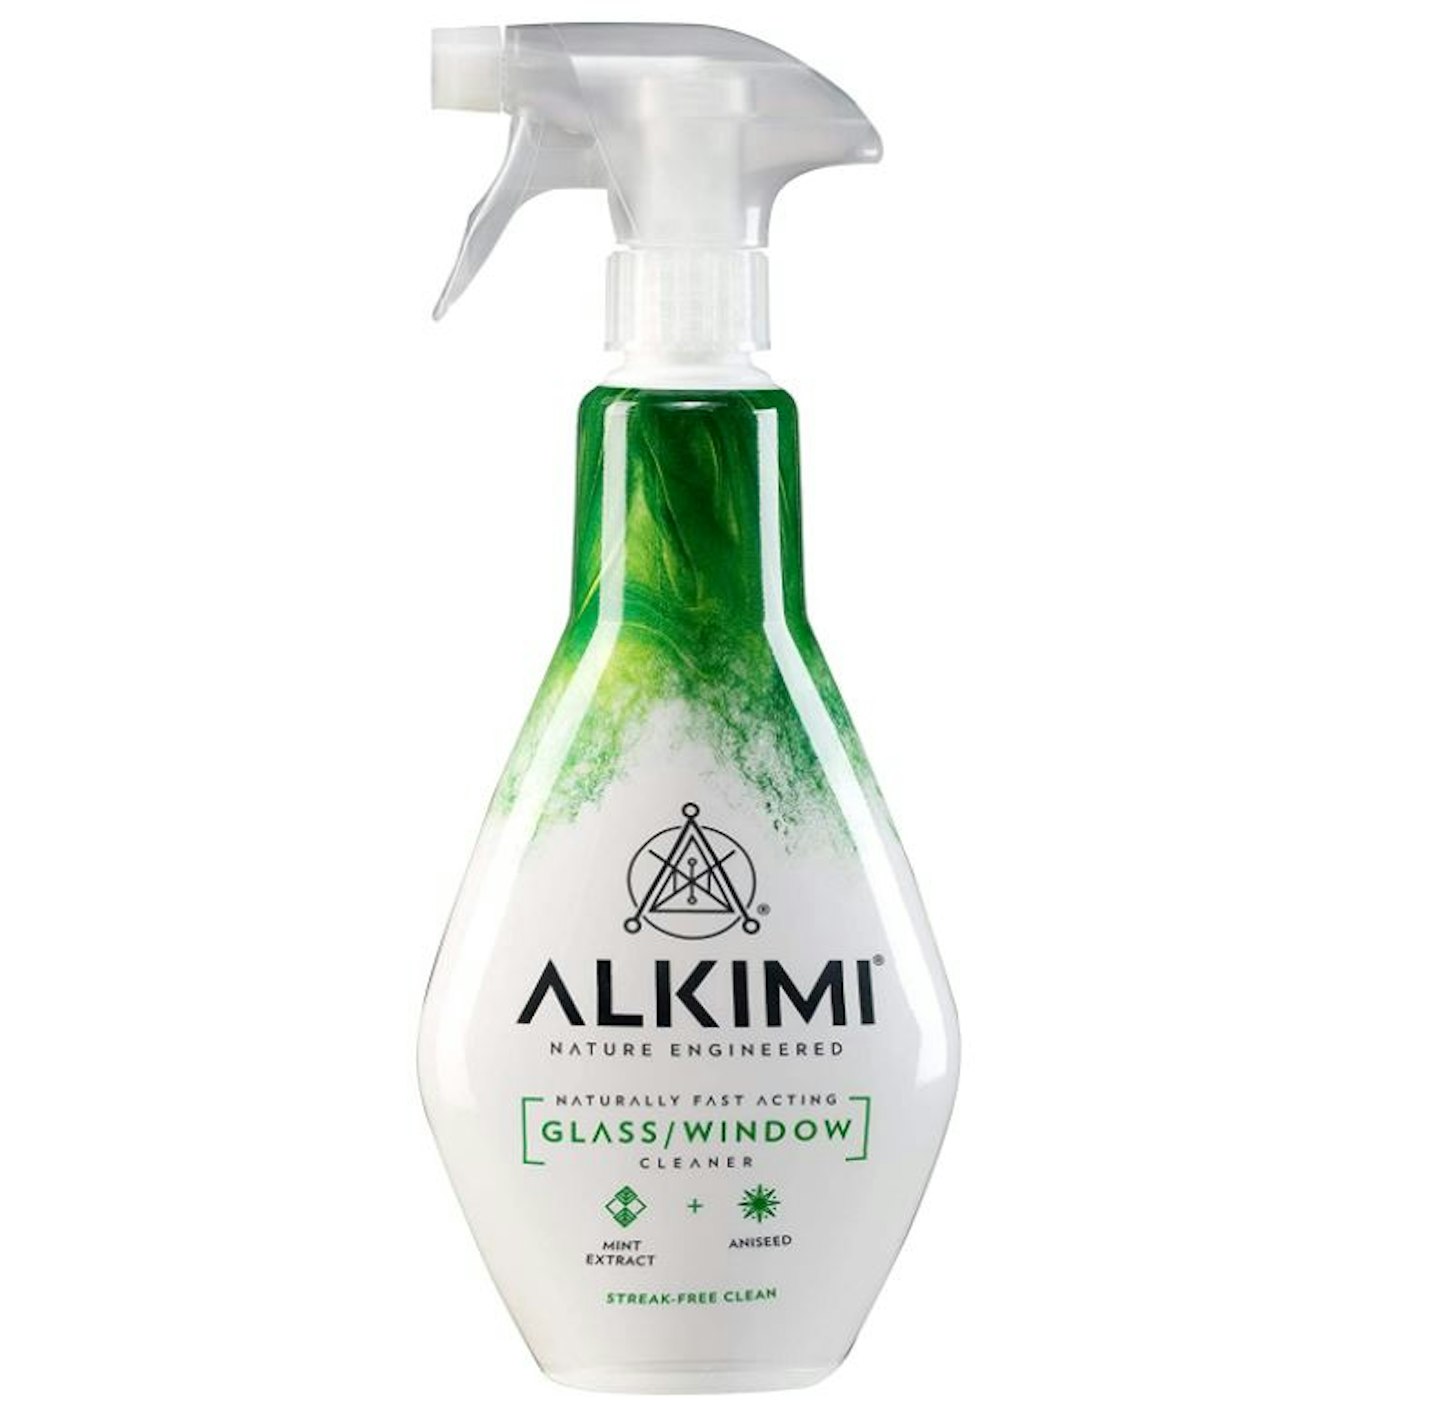 Alkimi glass/window cleaner with mint extract and aniseed